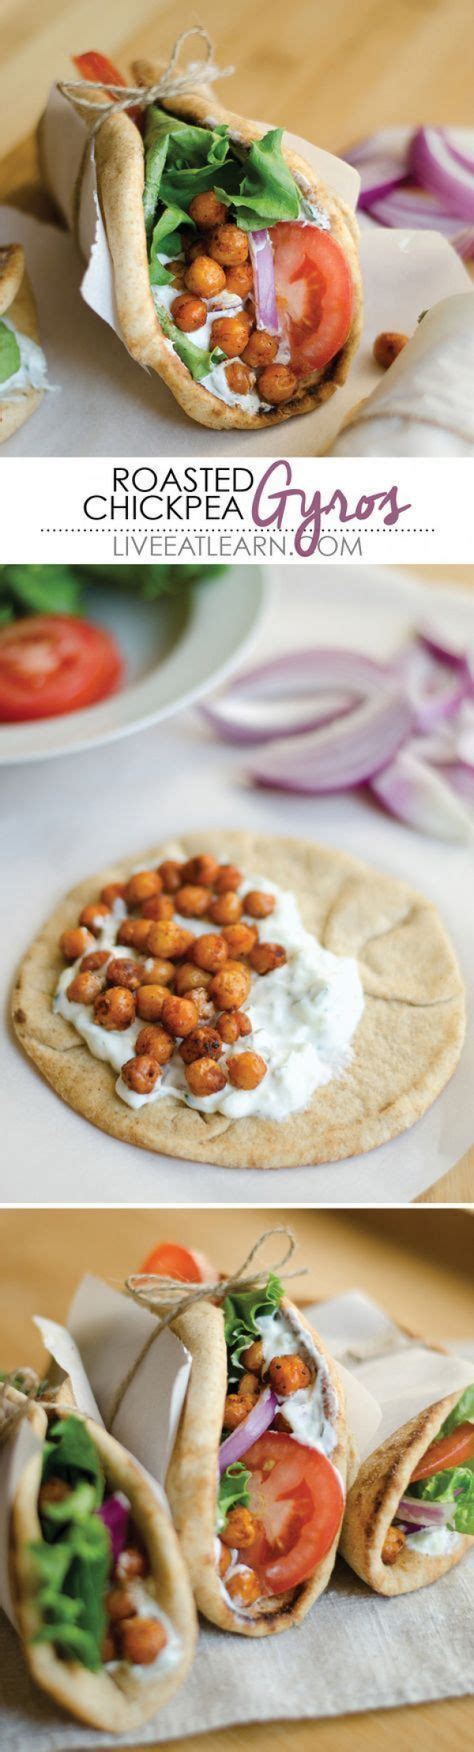 Roasted Chickpea Gyros Hearty Vegetarian With Vegan Options And Free